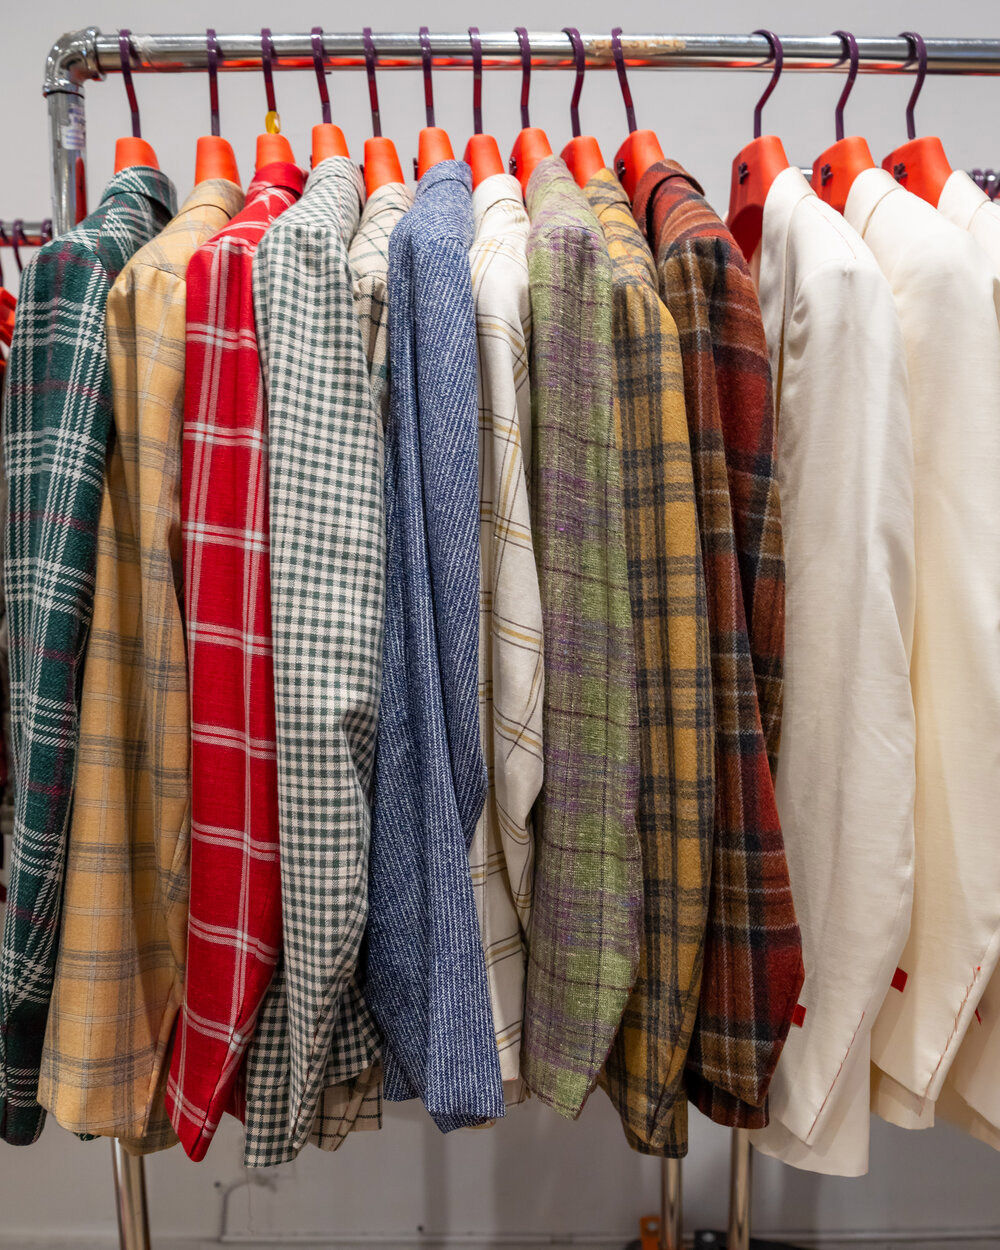 Isaia & Eidos Sample Sale in Images